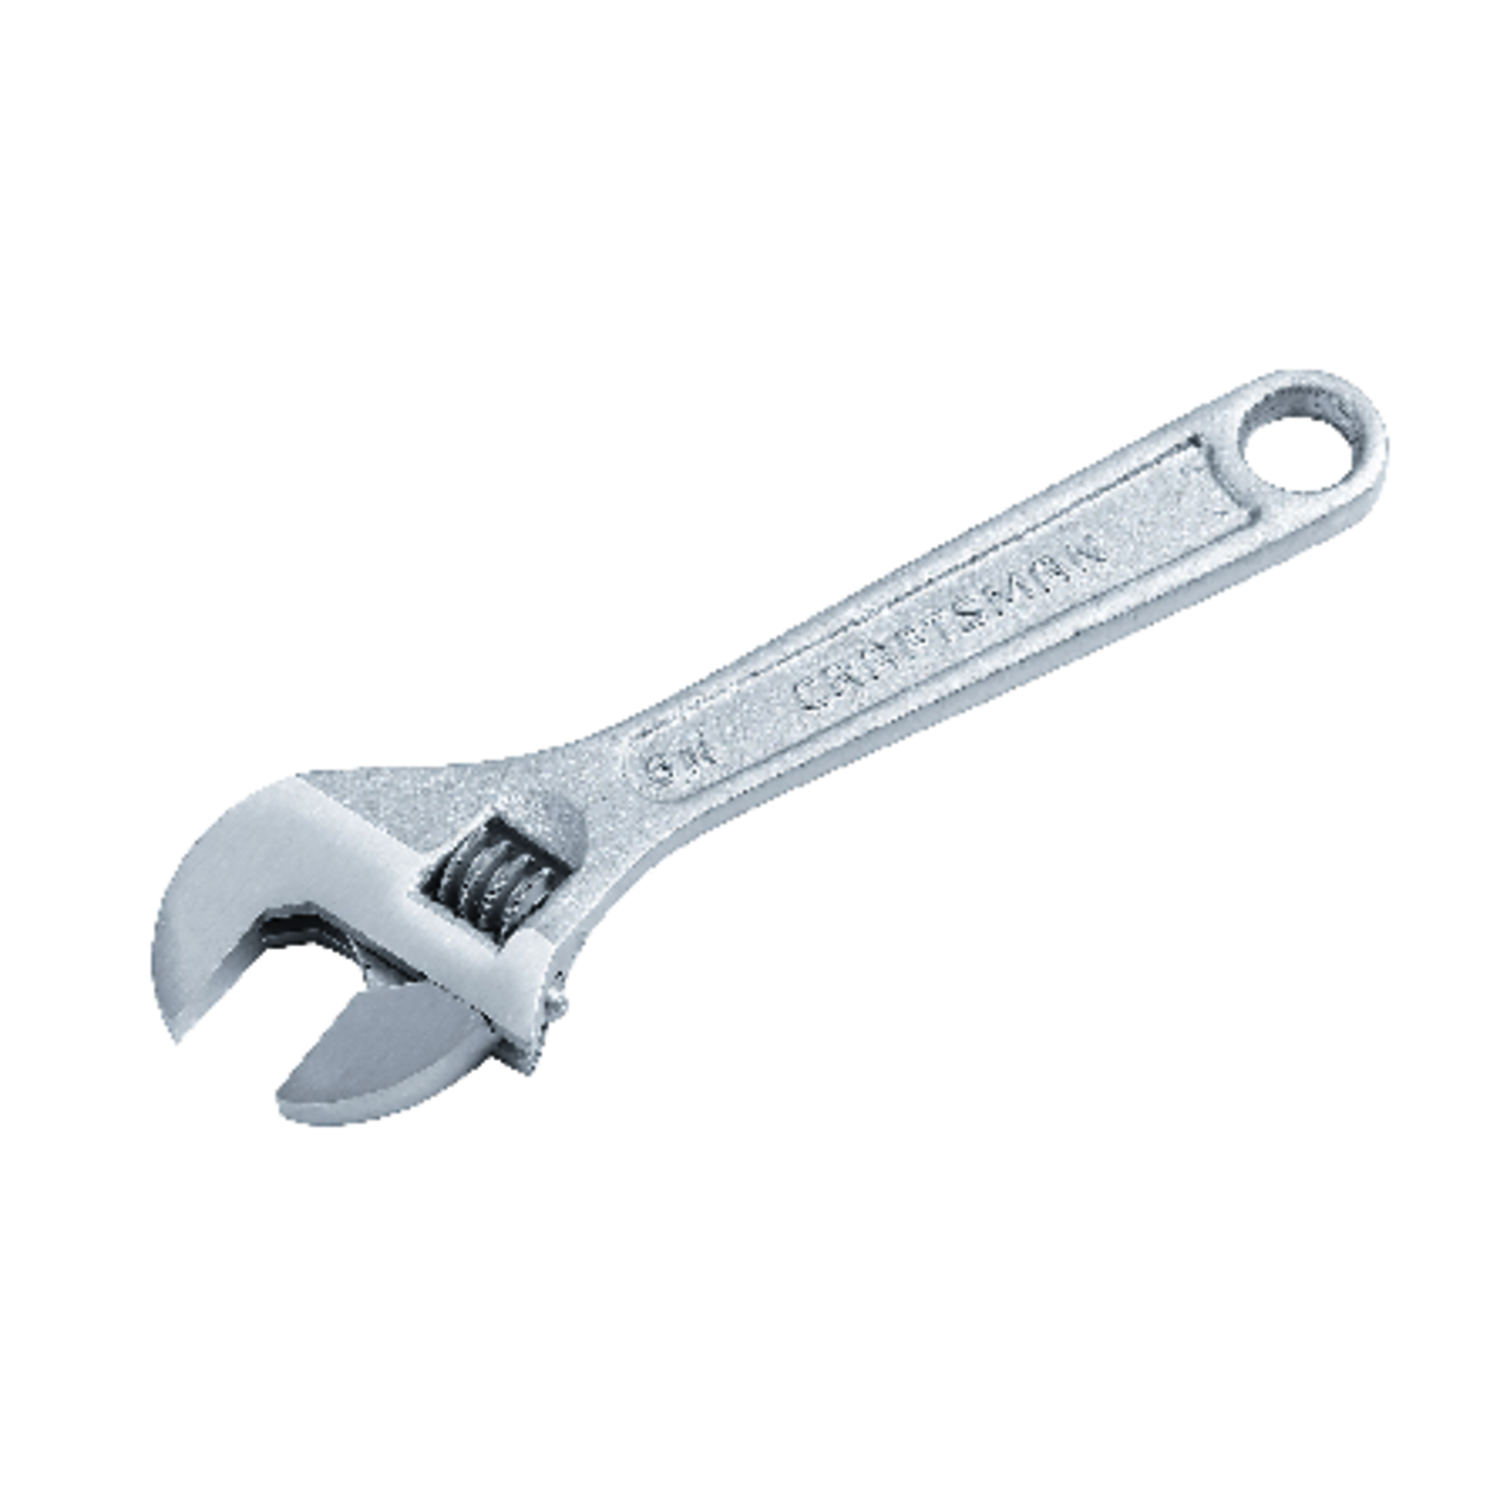 UPC 648738446020 product image for Craftsman 6in Adjustable Wrench (00944602) | upcitemdb.com